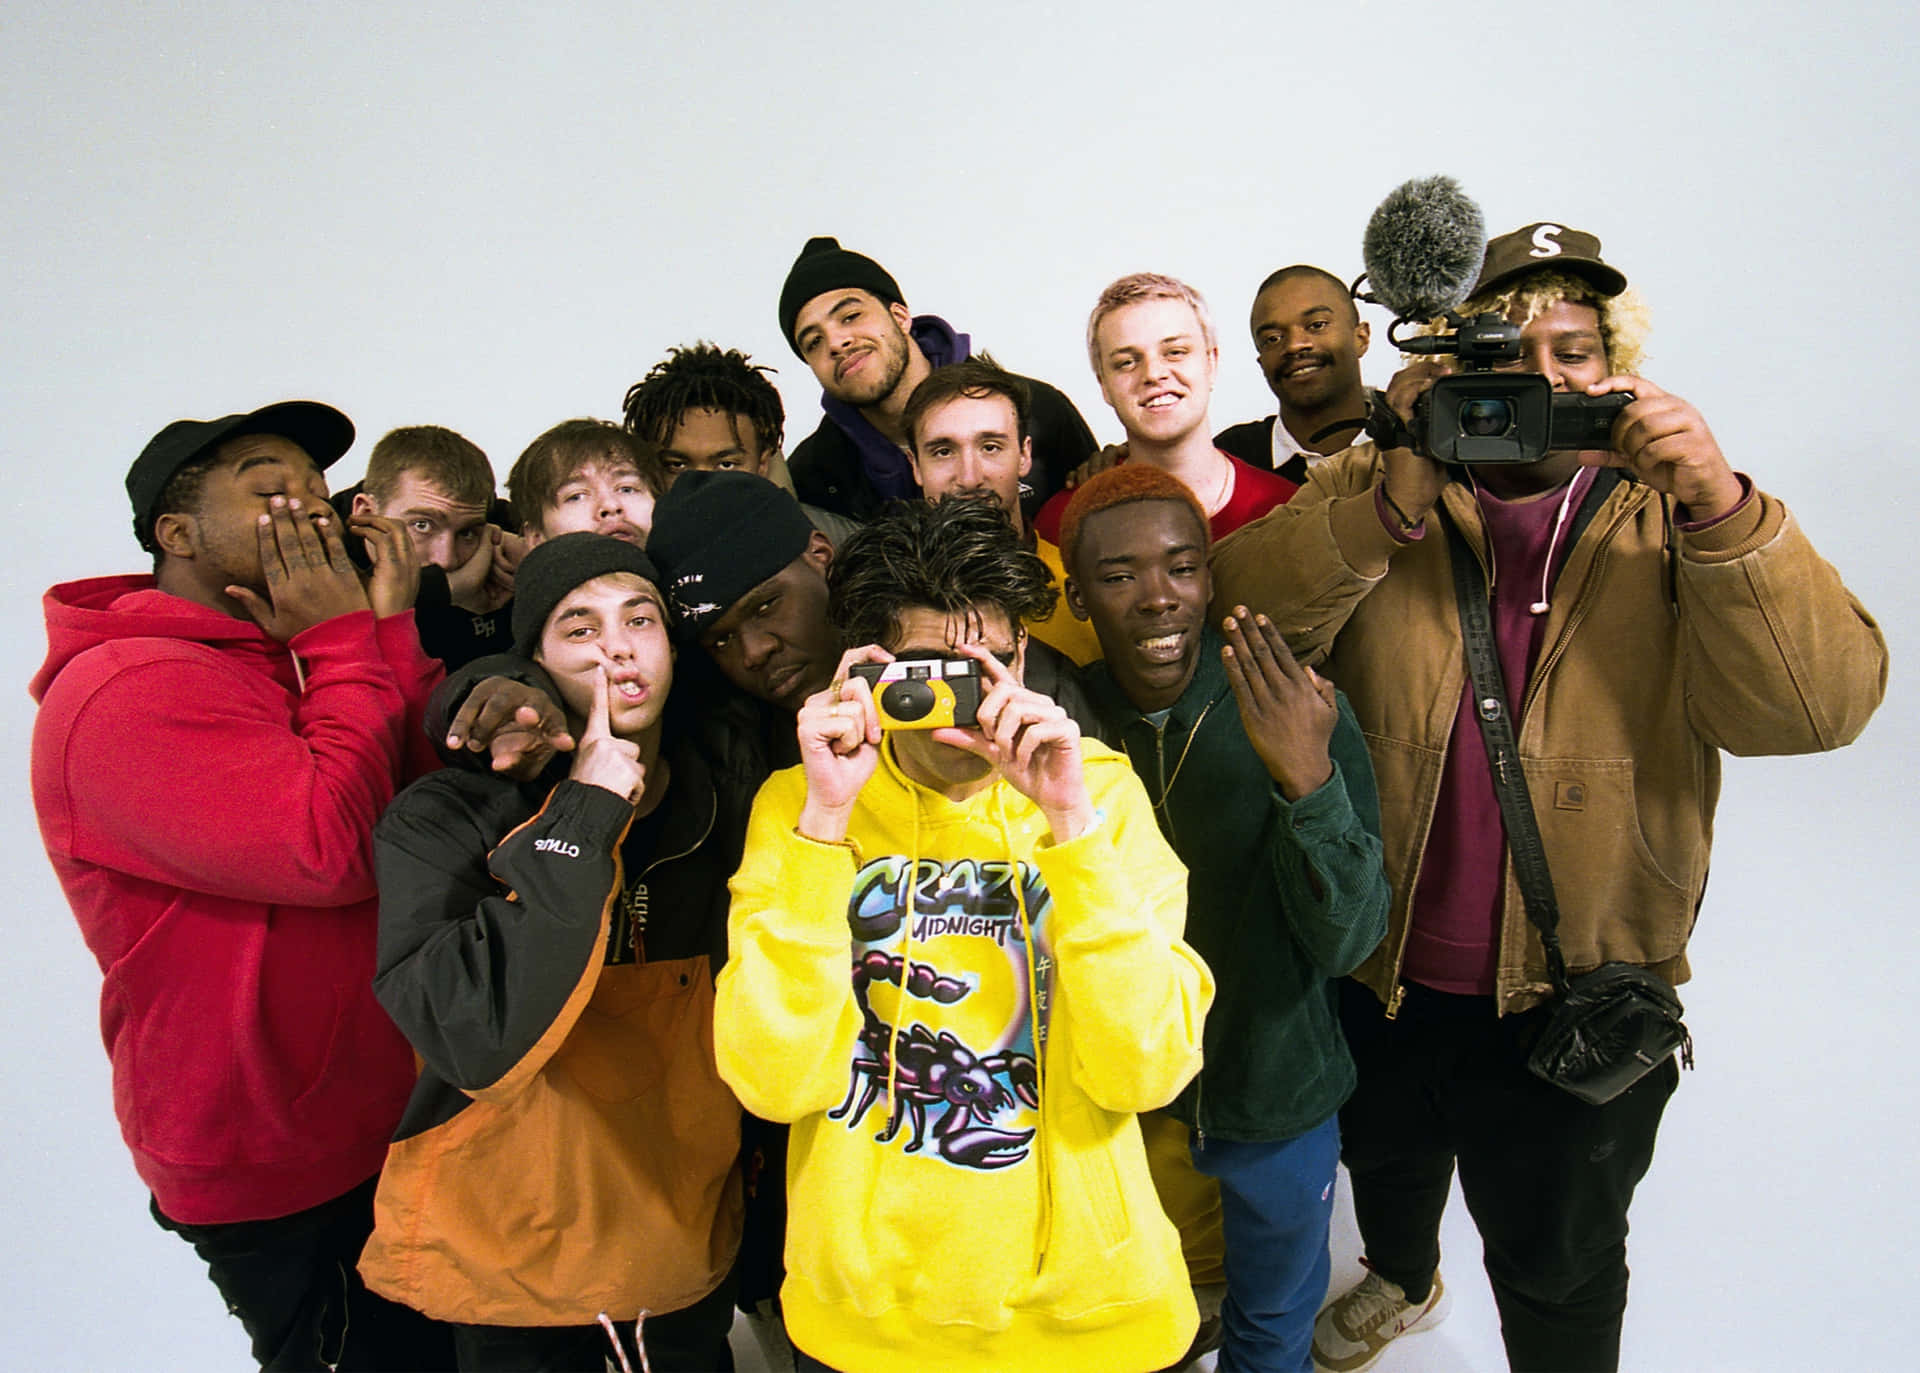 BROCKHAMPTON Poses Together in Creative Outfits Wallpaper